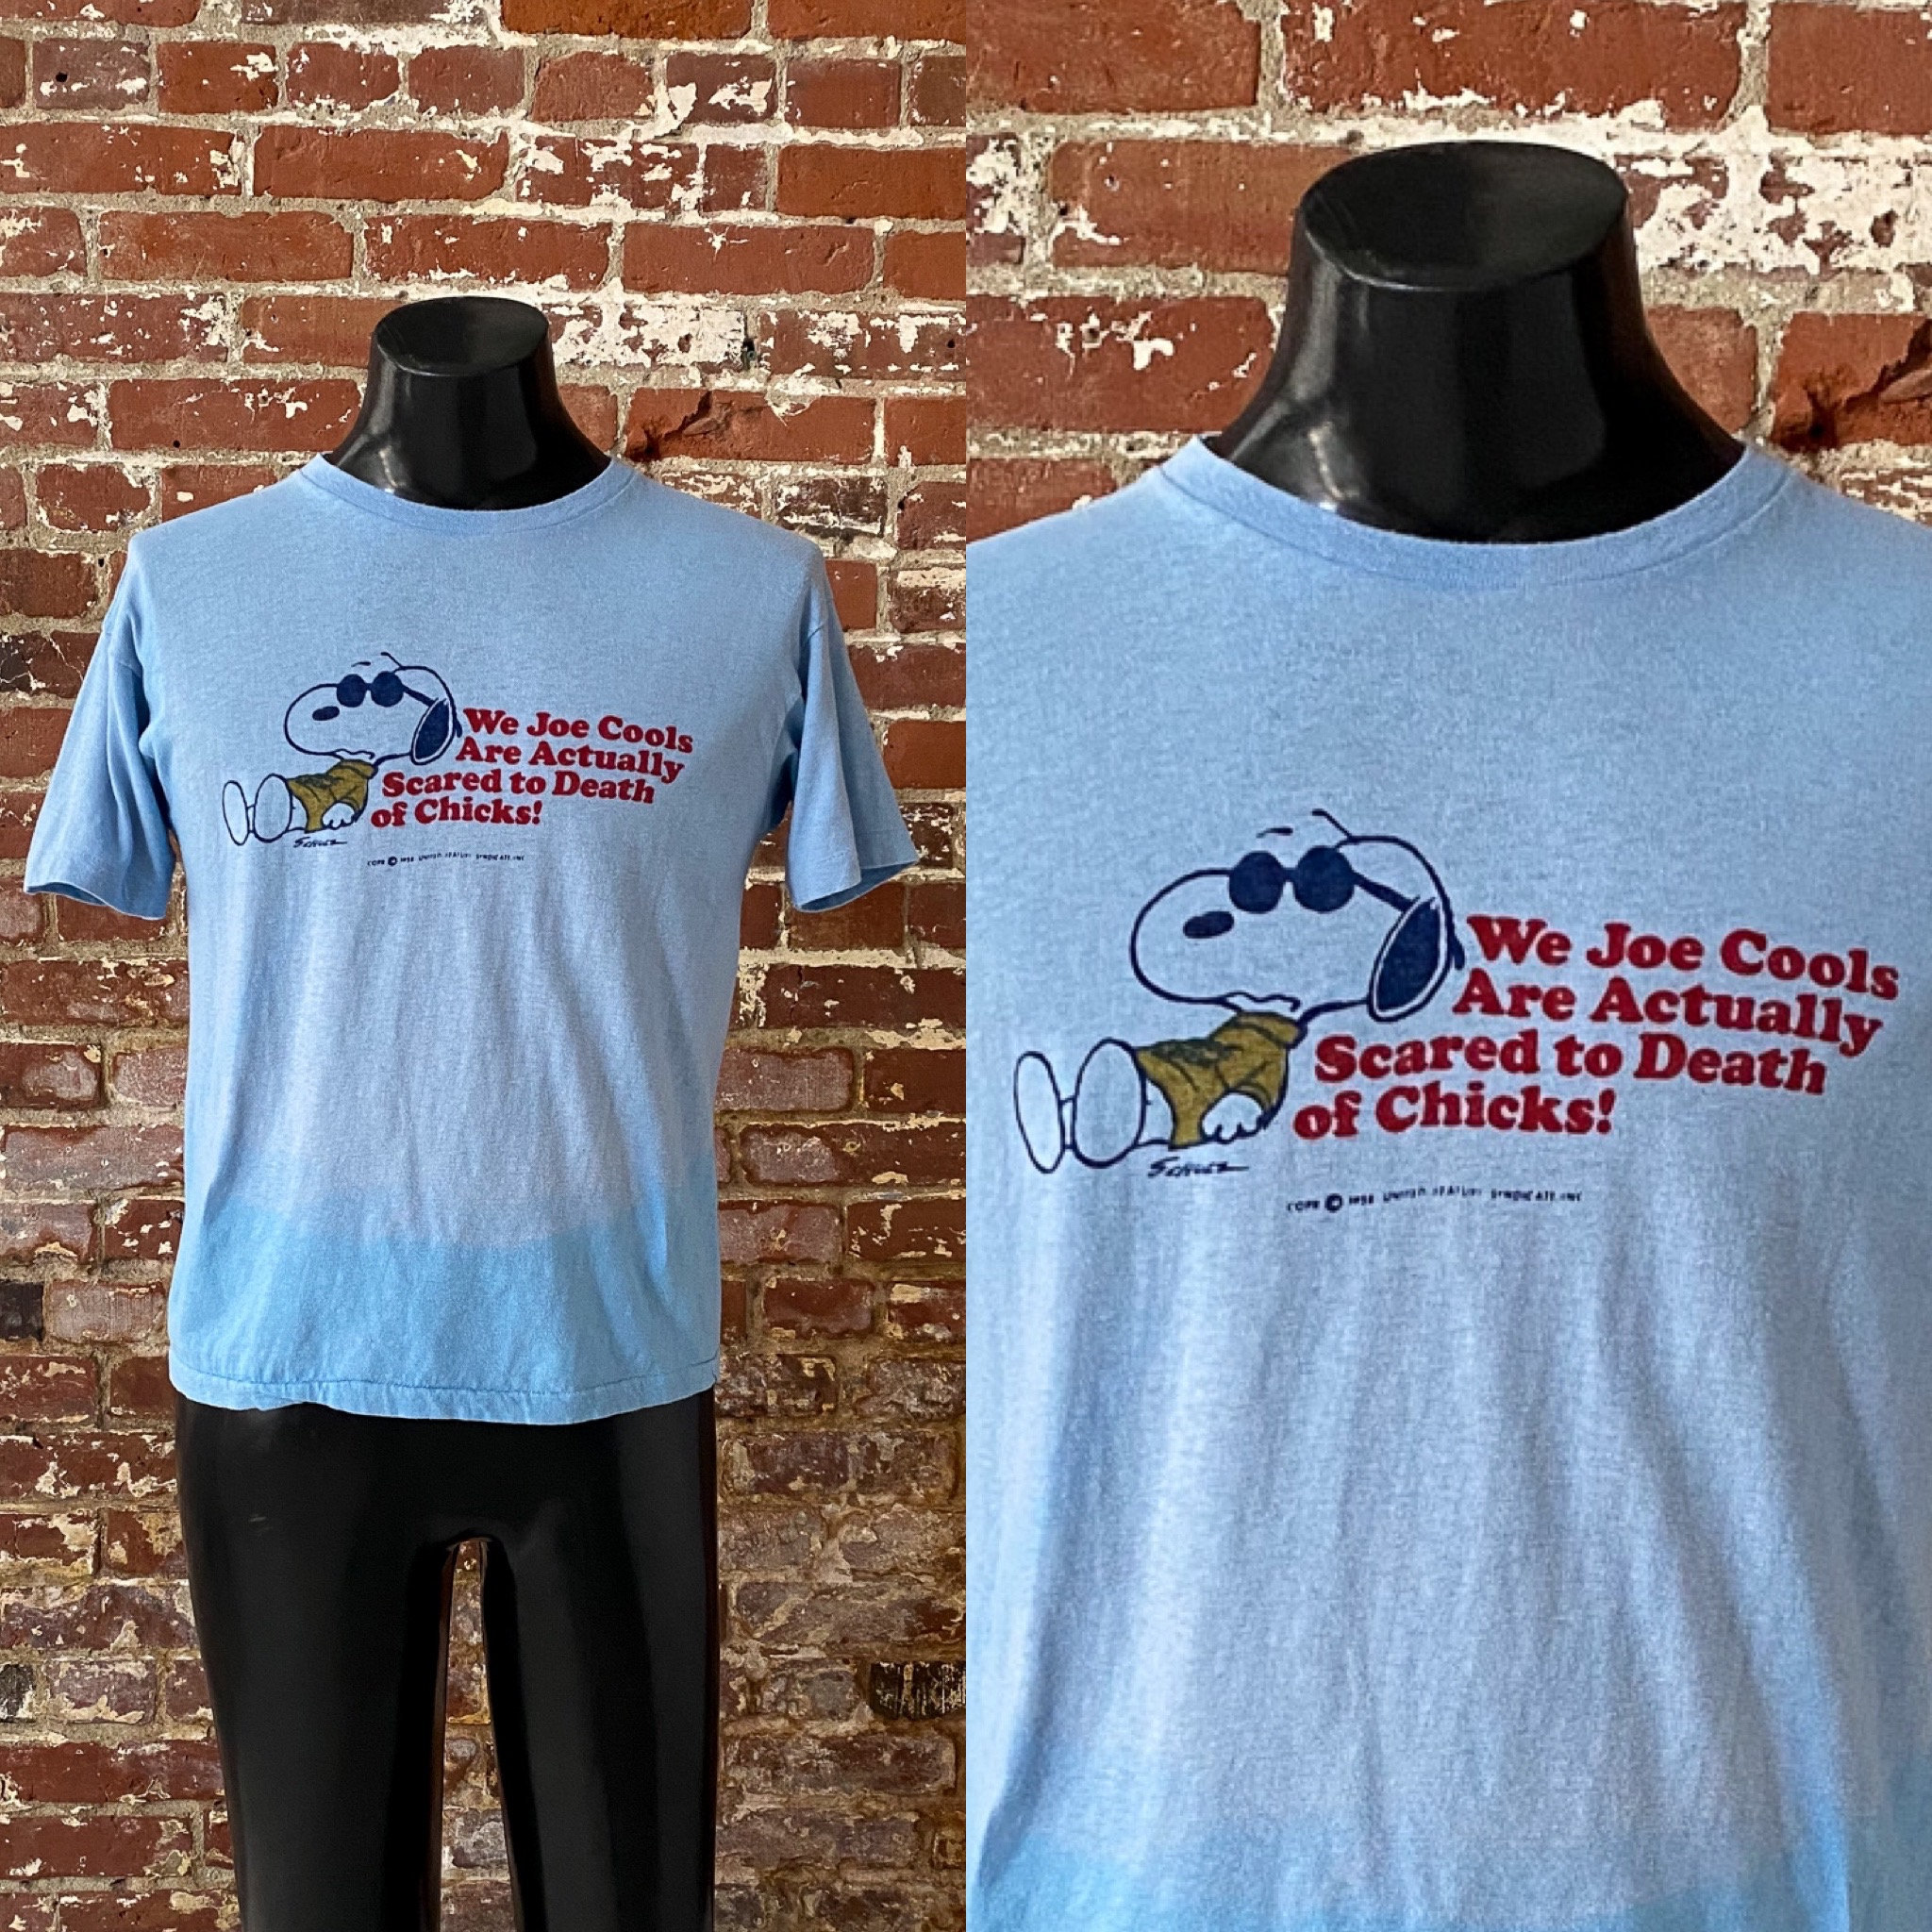 Snoopy And Woodstock Walking With Flag Louisville Cardinals Go Cards Shirt  - Vintagenclassic Tee